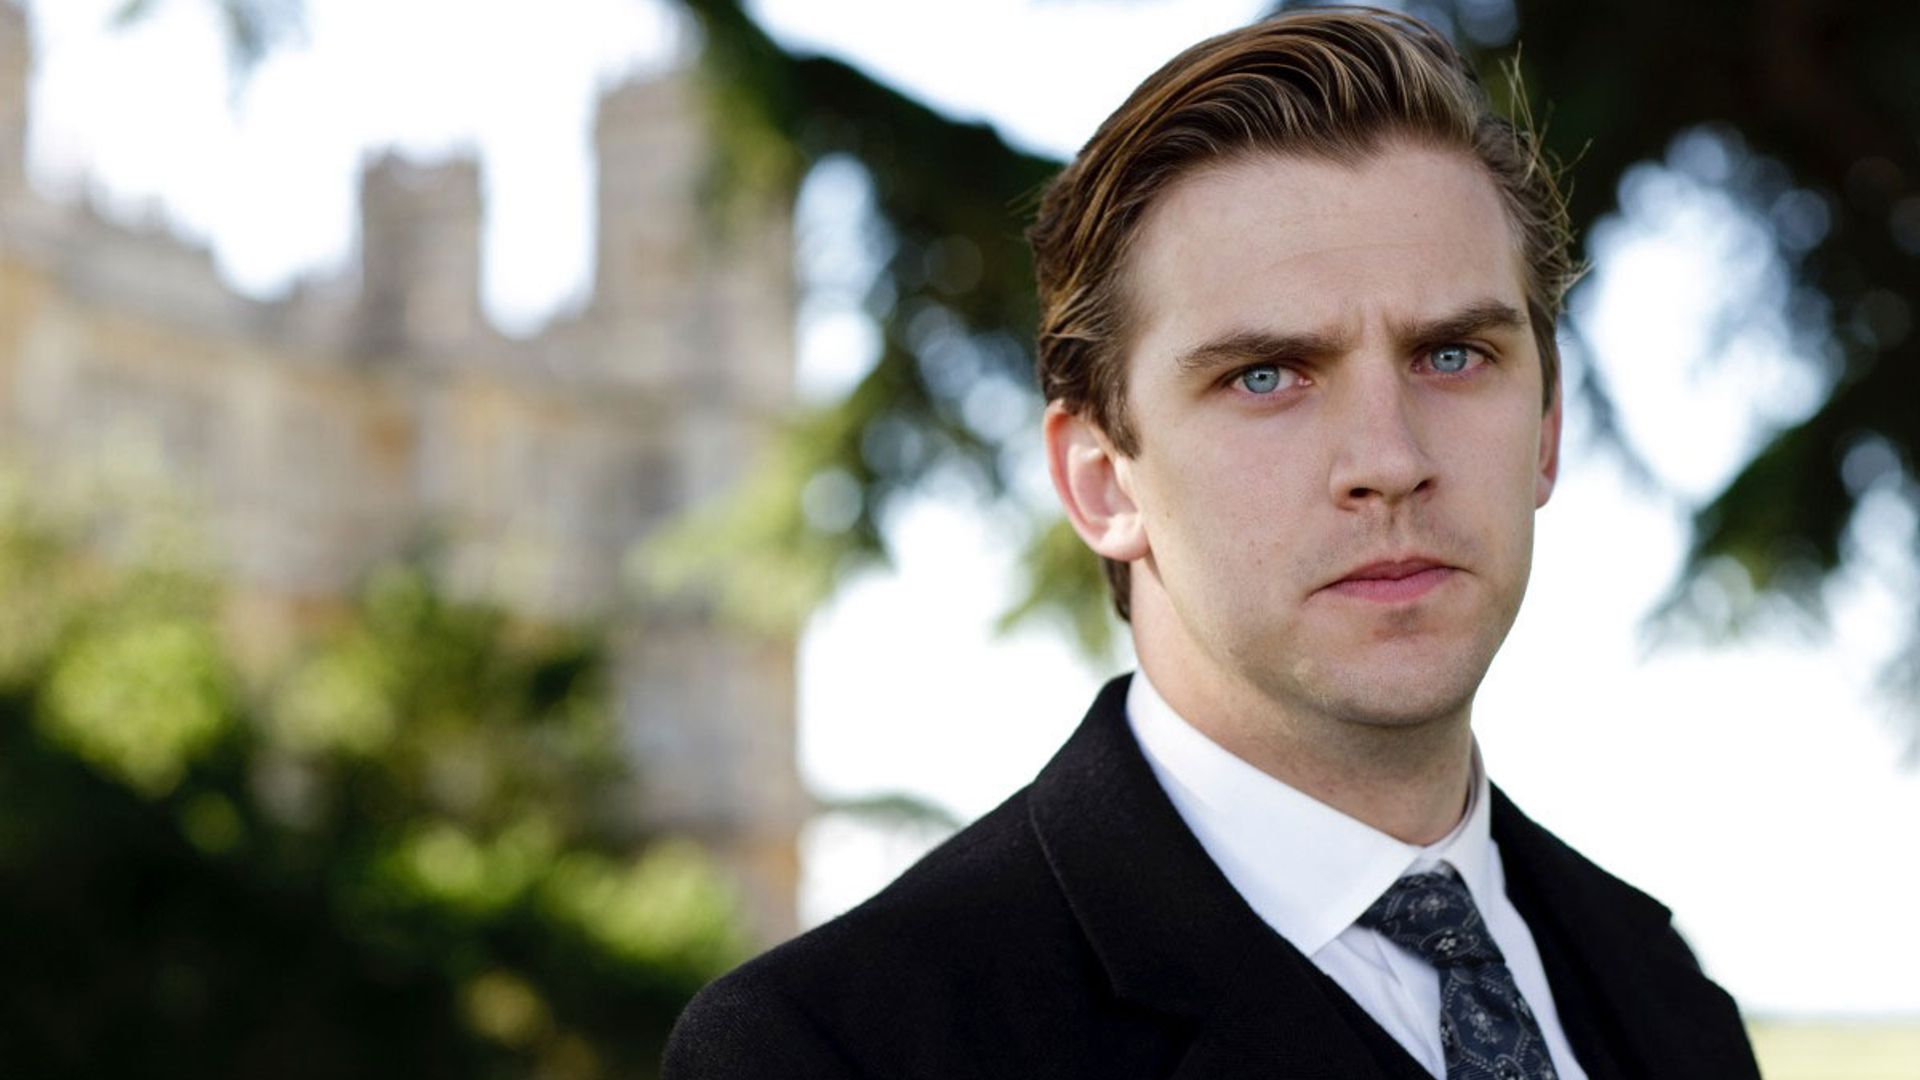 Meet Downton Abbey star Dan Stevens' wife and family here